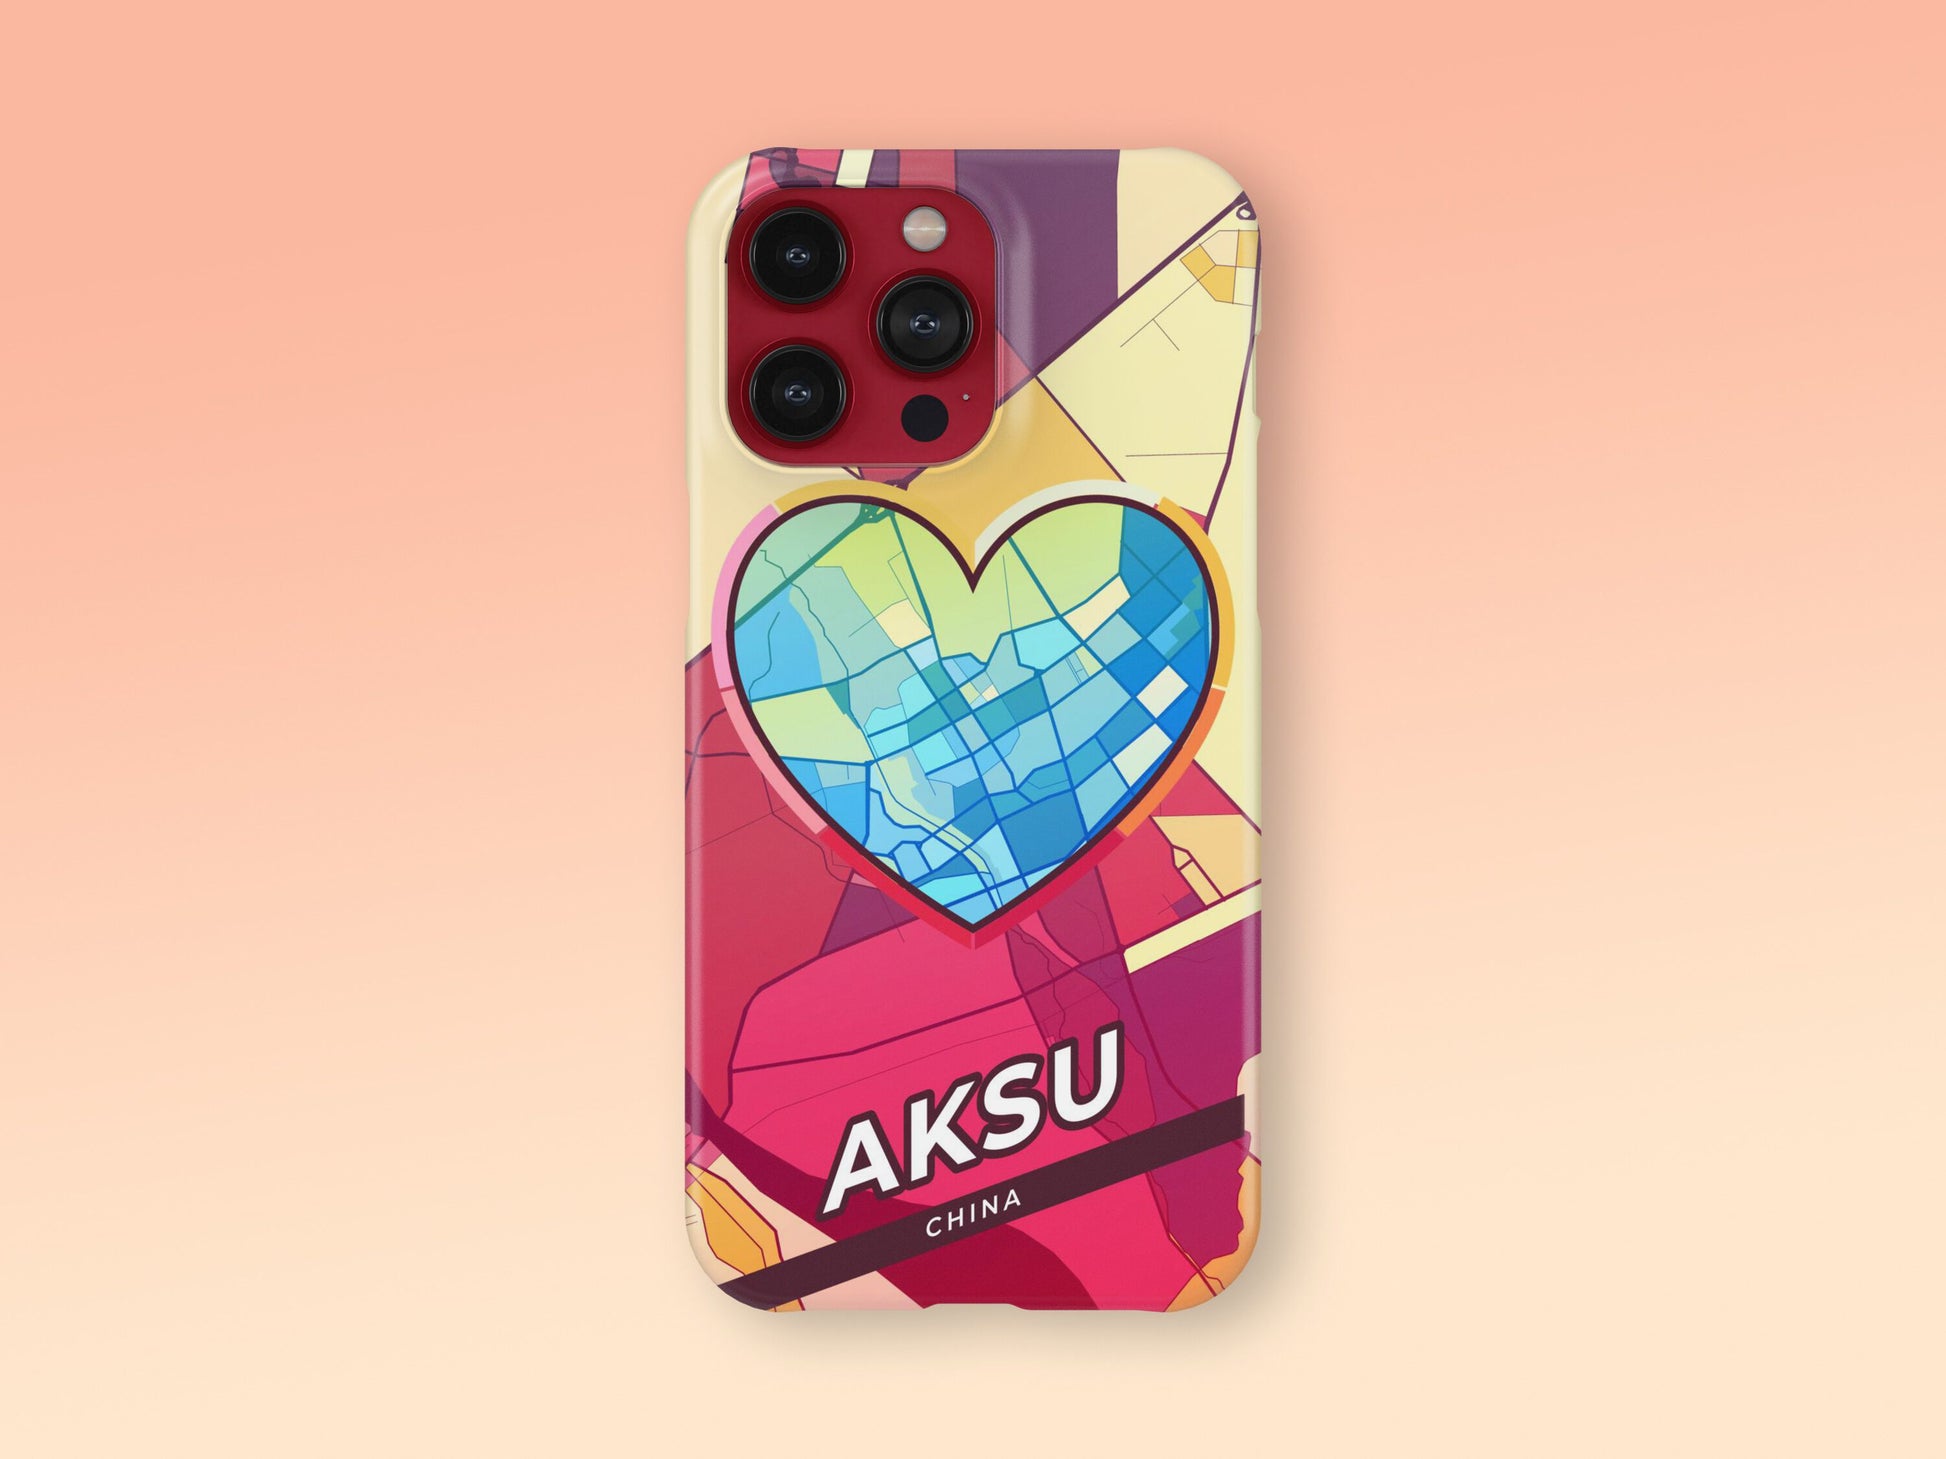 Aksu China slim phone case with colorful icon. Birthday, wedding or housewarming gift. Couple match cases. 2